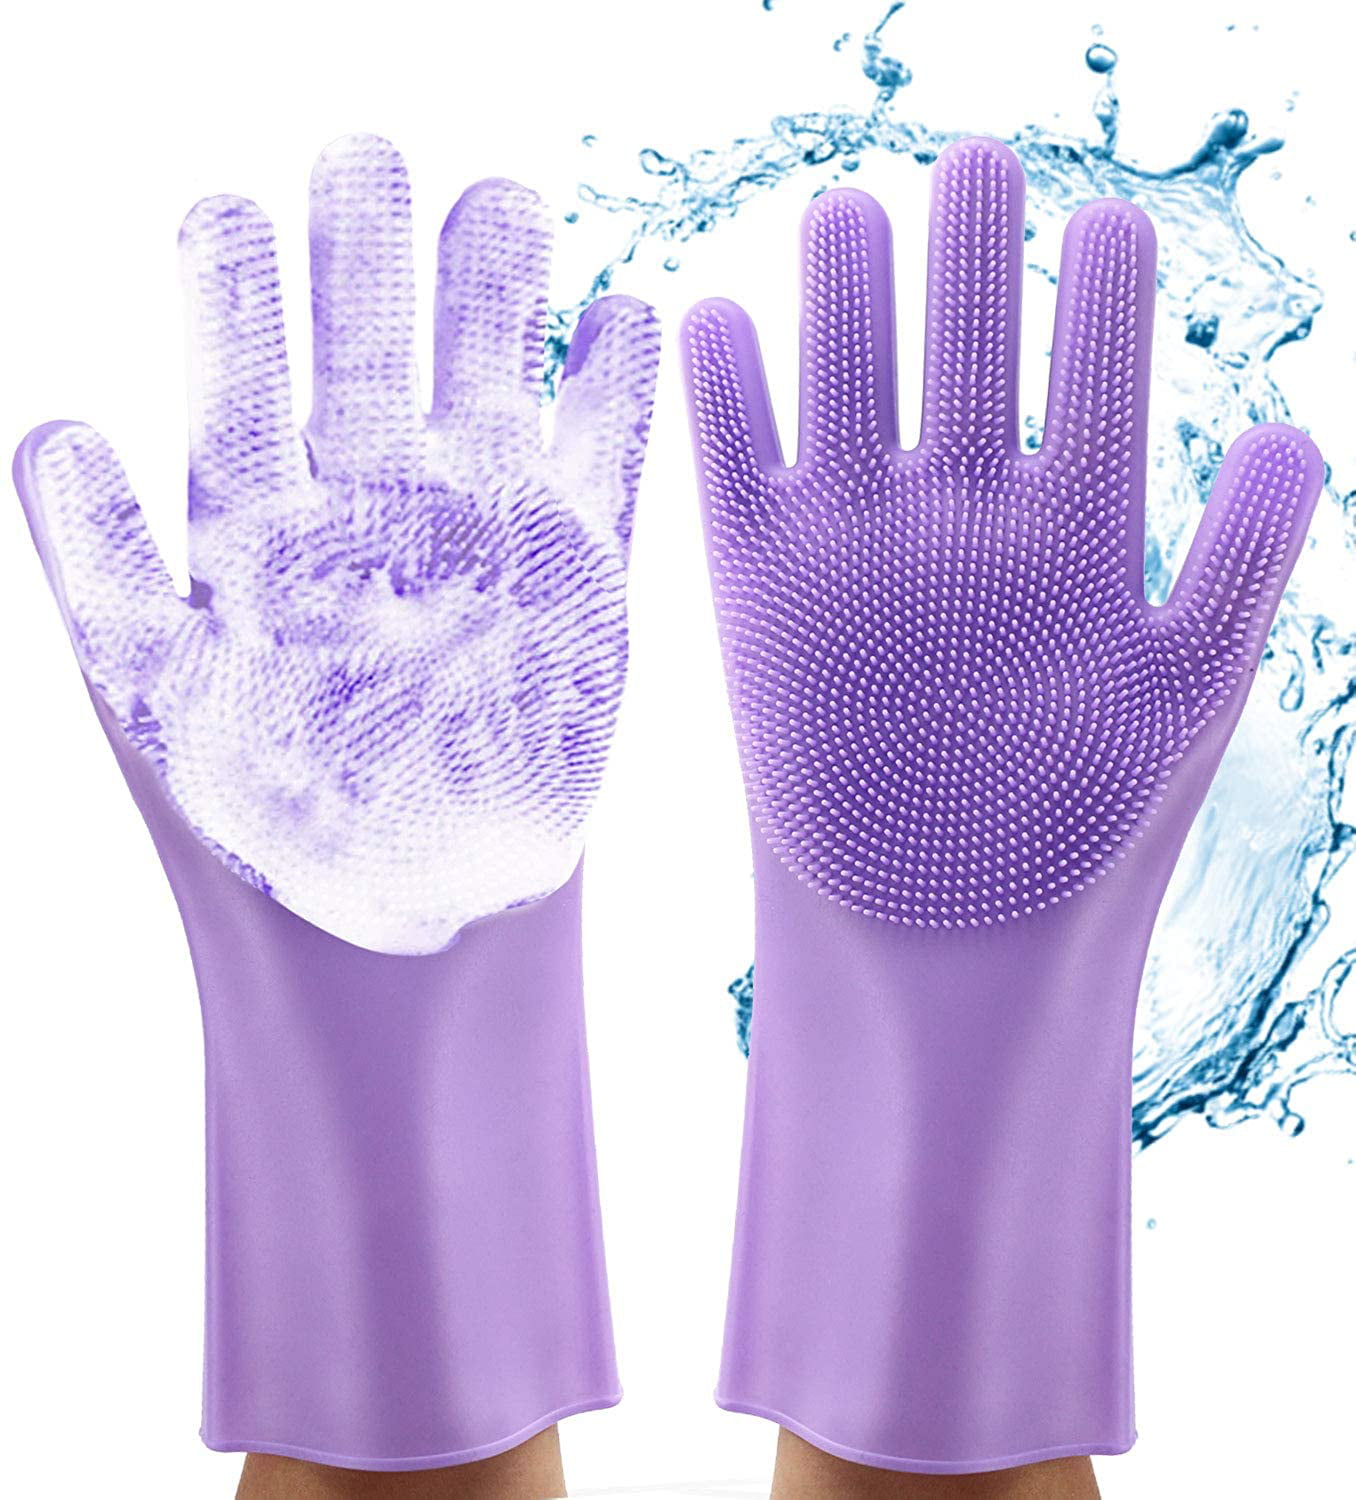 Magic Silicone Dish washing Cleaning Sponge Scrubber Gloves With long Bristles 